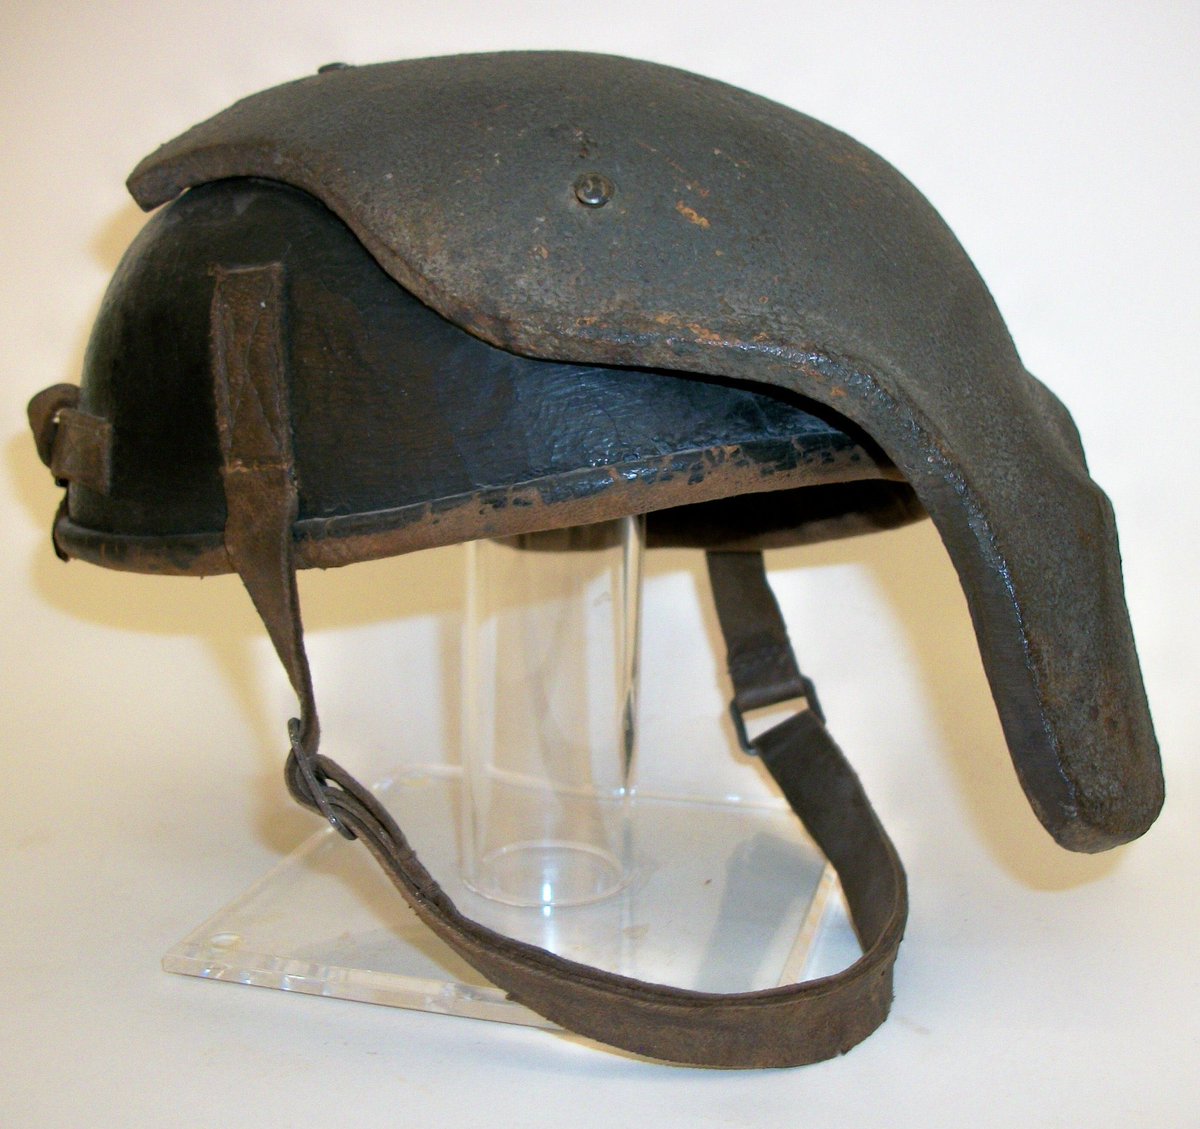 Another pre-cursor  #Stahlhelm thread & answer to yesterday’s question. Firstly, congratulations to those who correctly called this as a ‘Gaede’ helmet.A limited number, field designed solution, driven by hard learned necessity. 1)